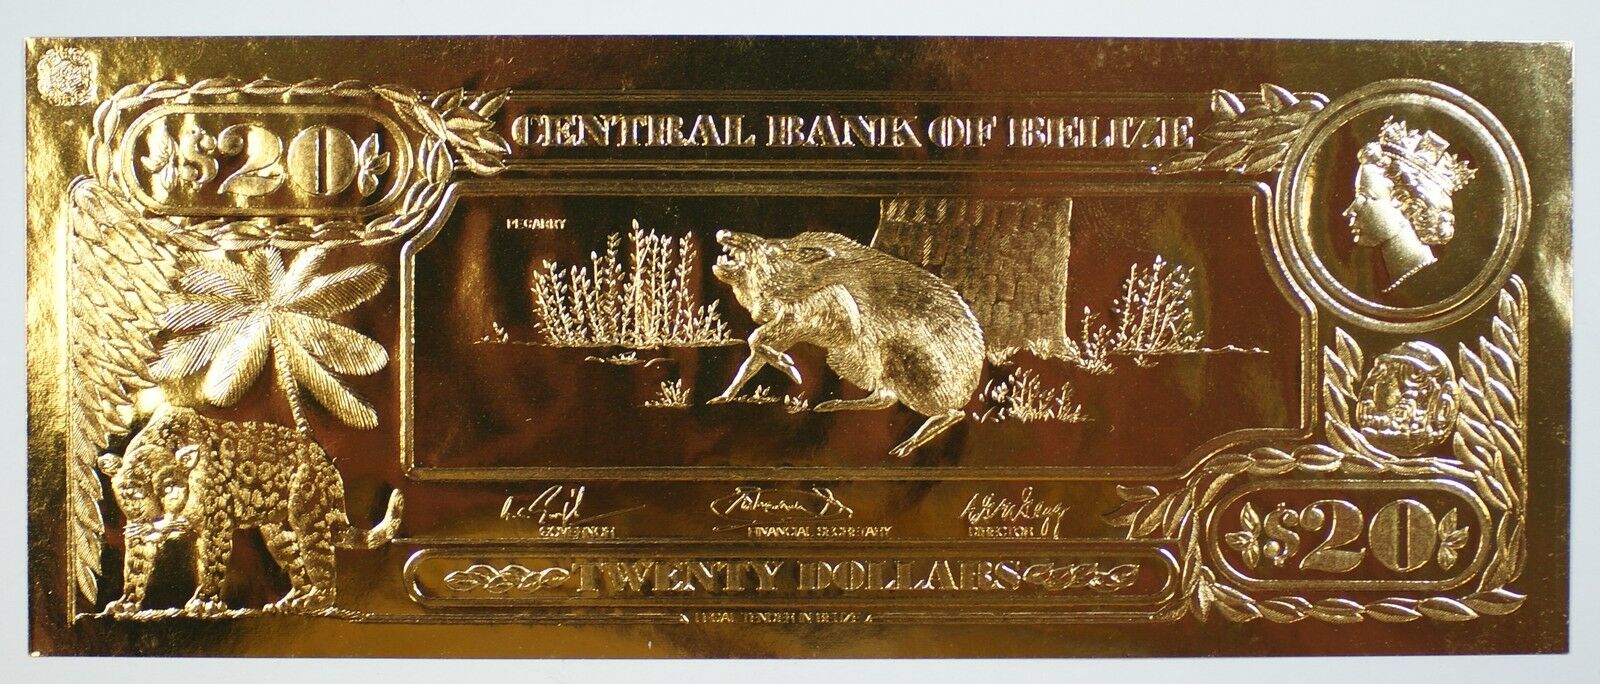 $20 Peccary-The First Gold Bank Notes of Belize w/ Presentation Card